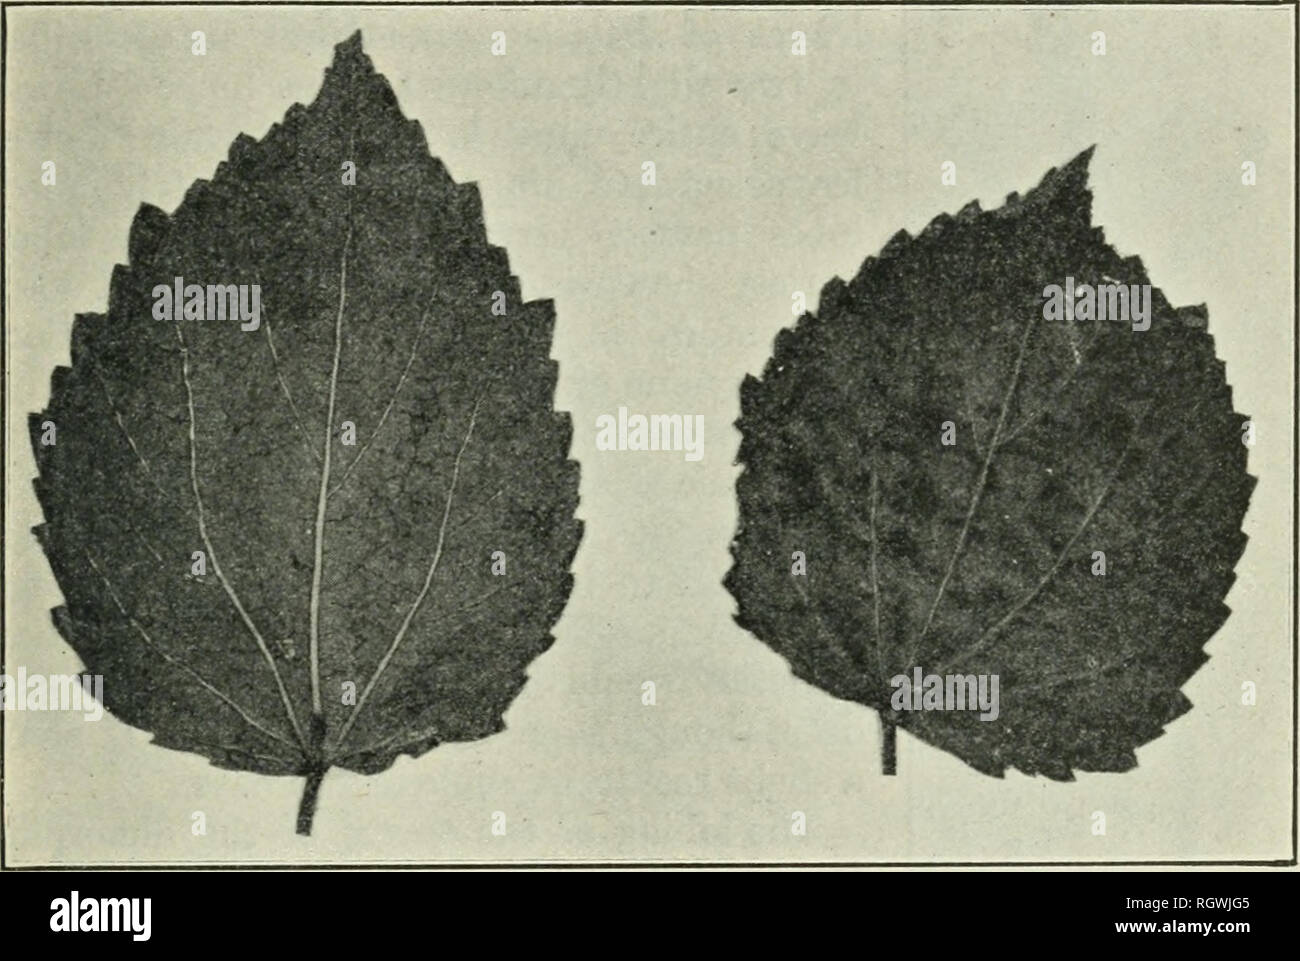 . Bulletin. 1901-13. Agriculture; Agriculture. LEAF FORMS OF VARIETIES OF HIBISCUS CANNABINUS. 15 been found on the Egyptian cotton in Arizona as low as the seventh node, as reported by Mr. Argyle McLachlan. LEAF FORMS OF VARIETIES OF HIBISCUS CANNABINUS. At least two varieties of the Deccan hemp are grown in Egypt, one with deeply divided, finely toothed leaves (Pis. I and II) and the other with more coarsely toothed, undivided leaves (figs. 1, 2, 3, and 4). It does not appear that either of these Egyptian varieties has been introduced into the United States, but a third variety with digitate Stock Photo